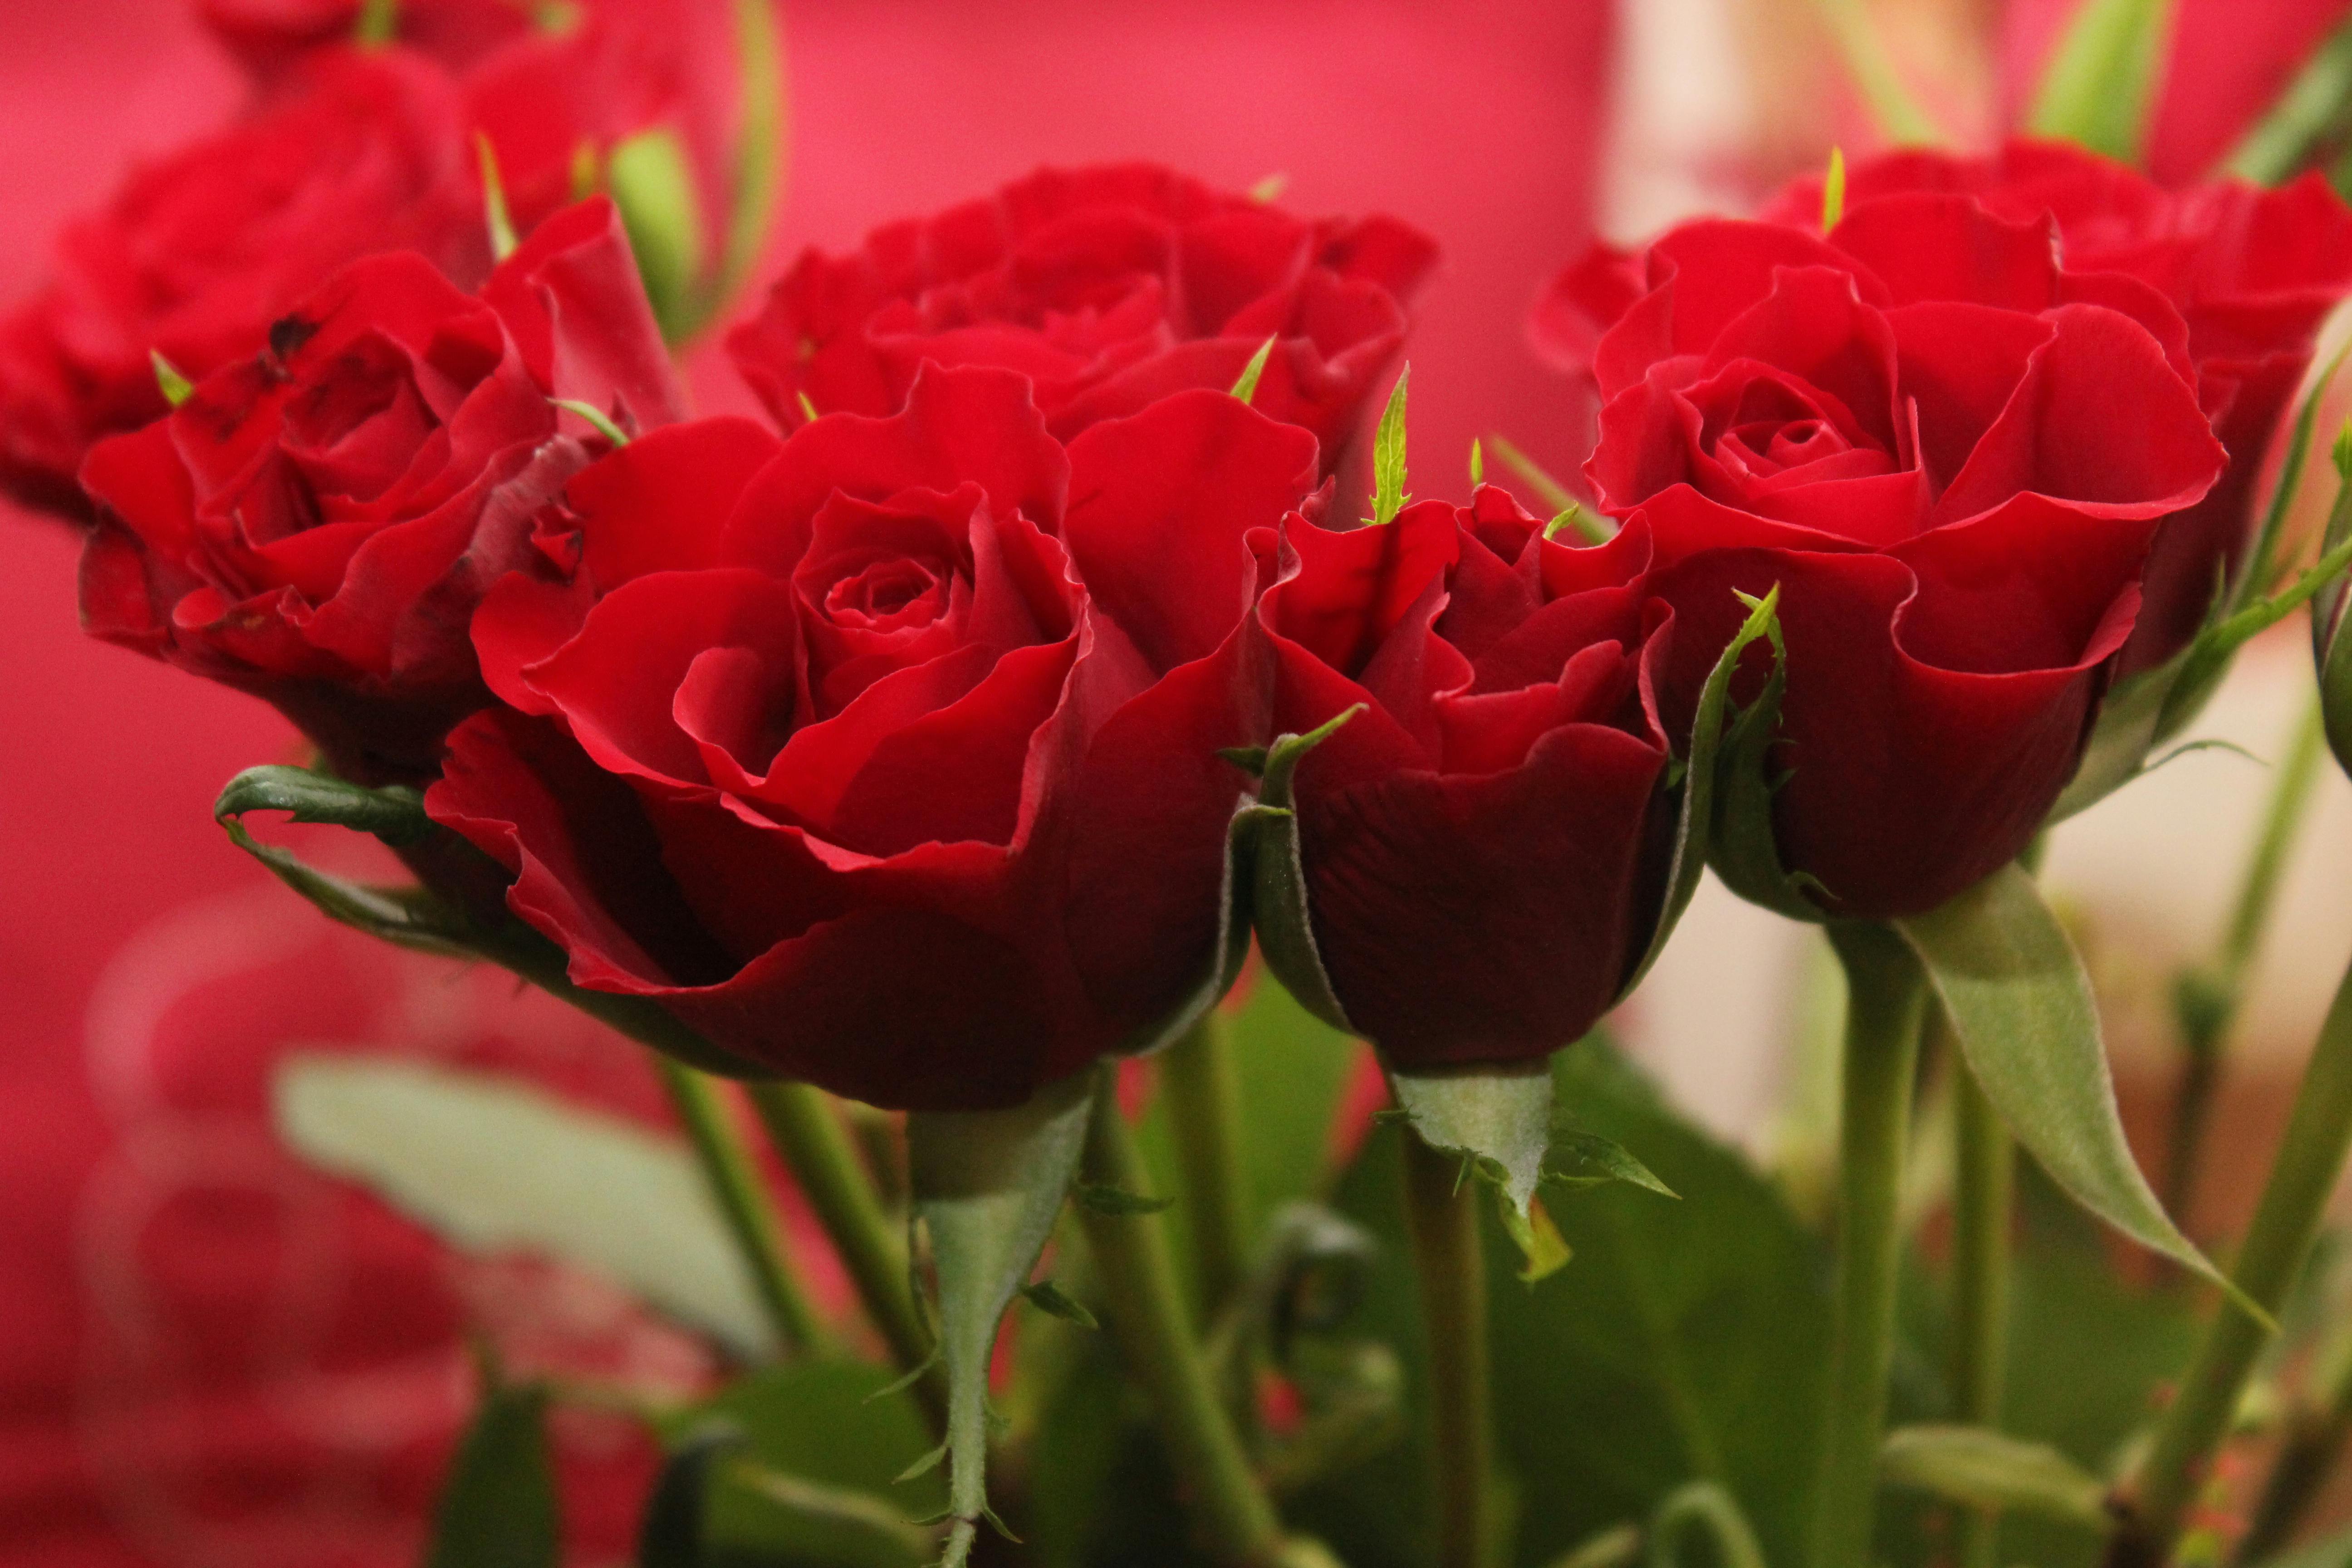 Bouquet of red roses | Source: Pexels